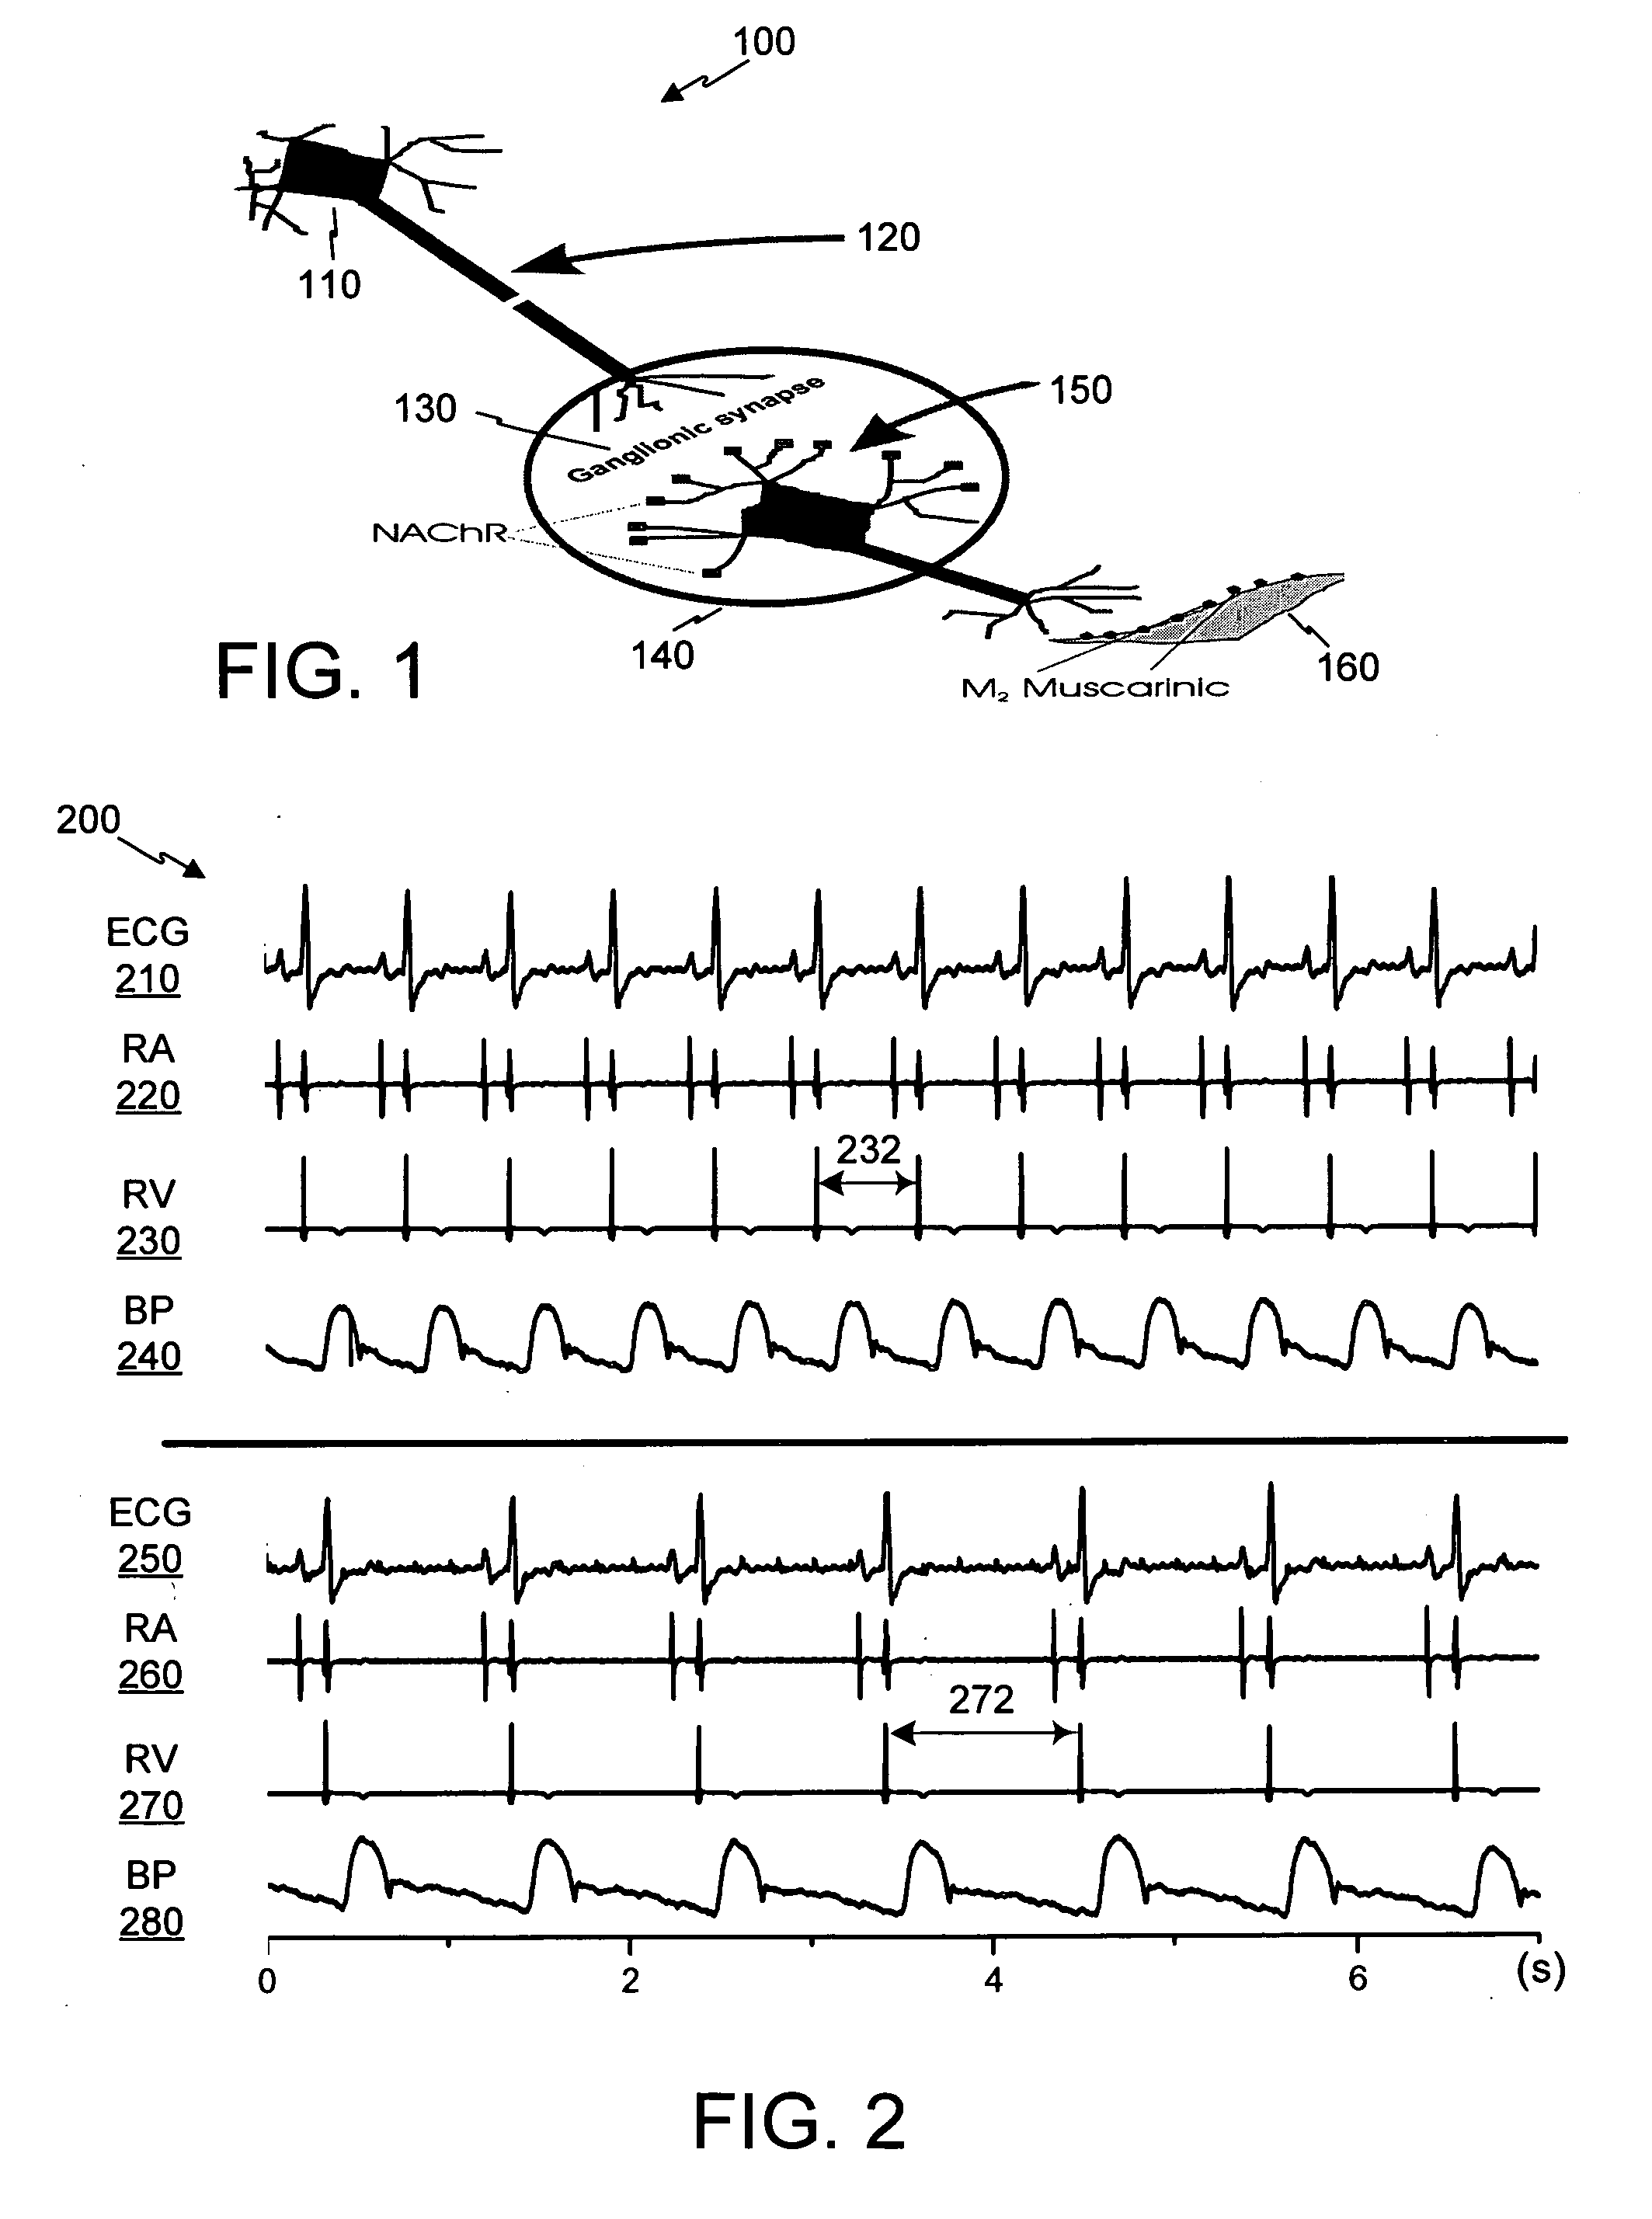 Control of cardiac arrhythmias by modification of neuronal conduction within fat pads of the heart